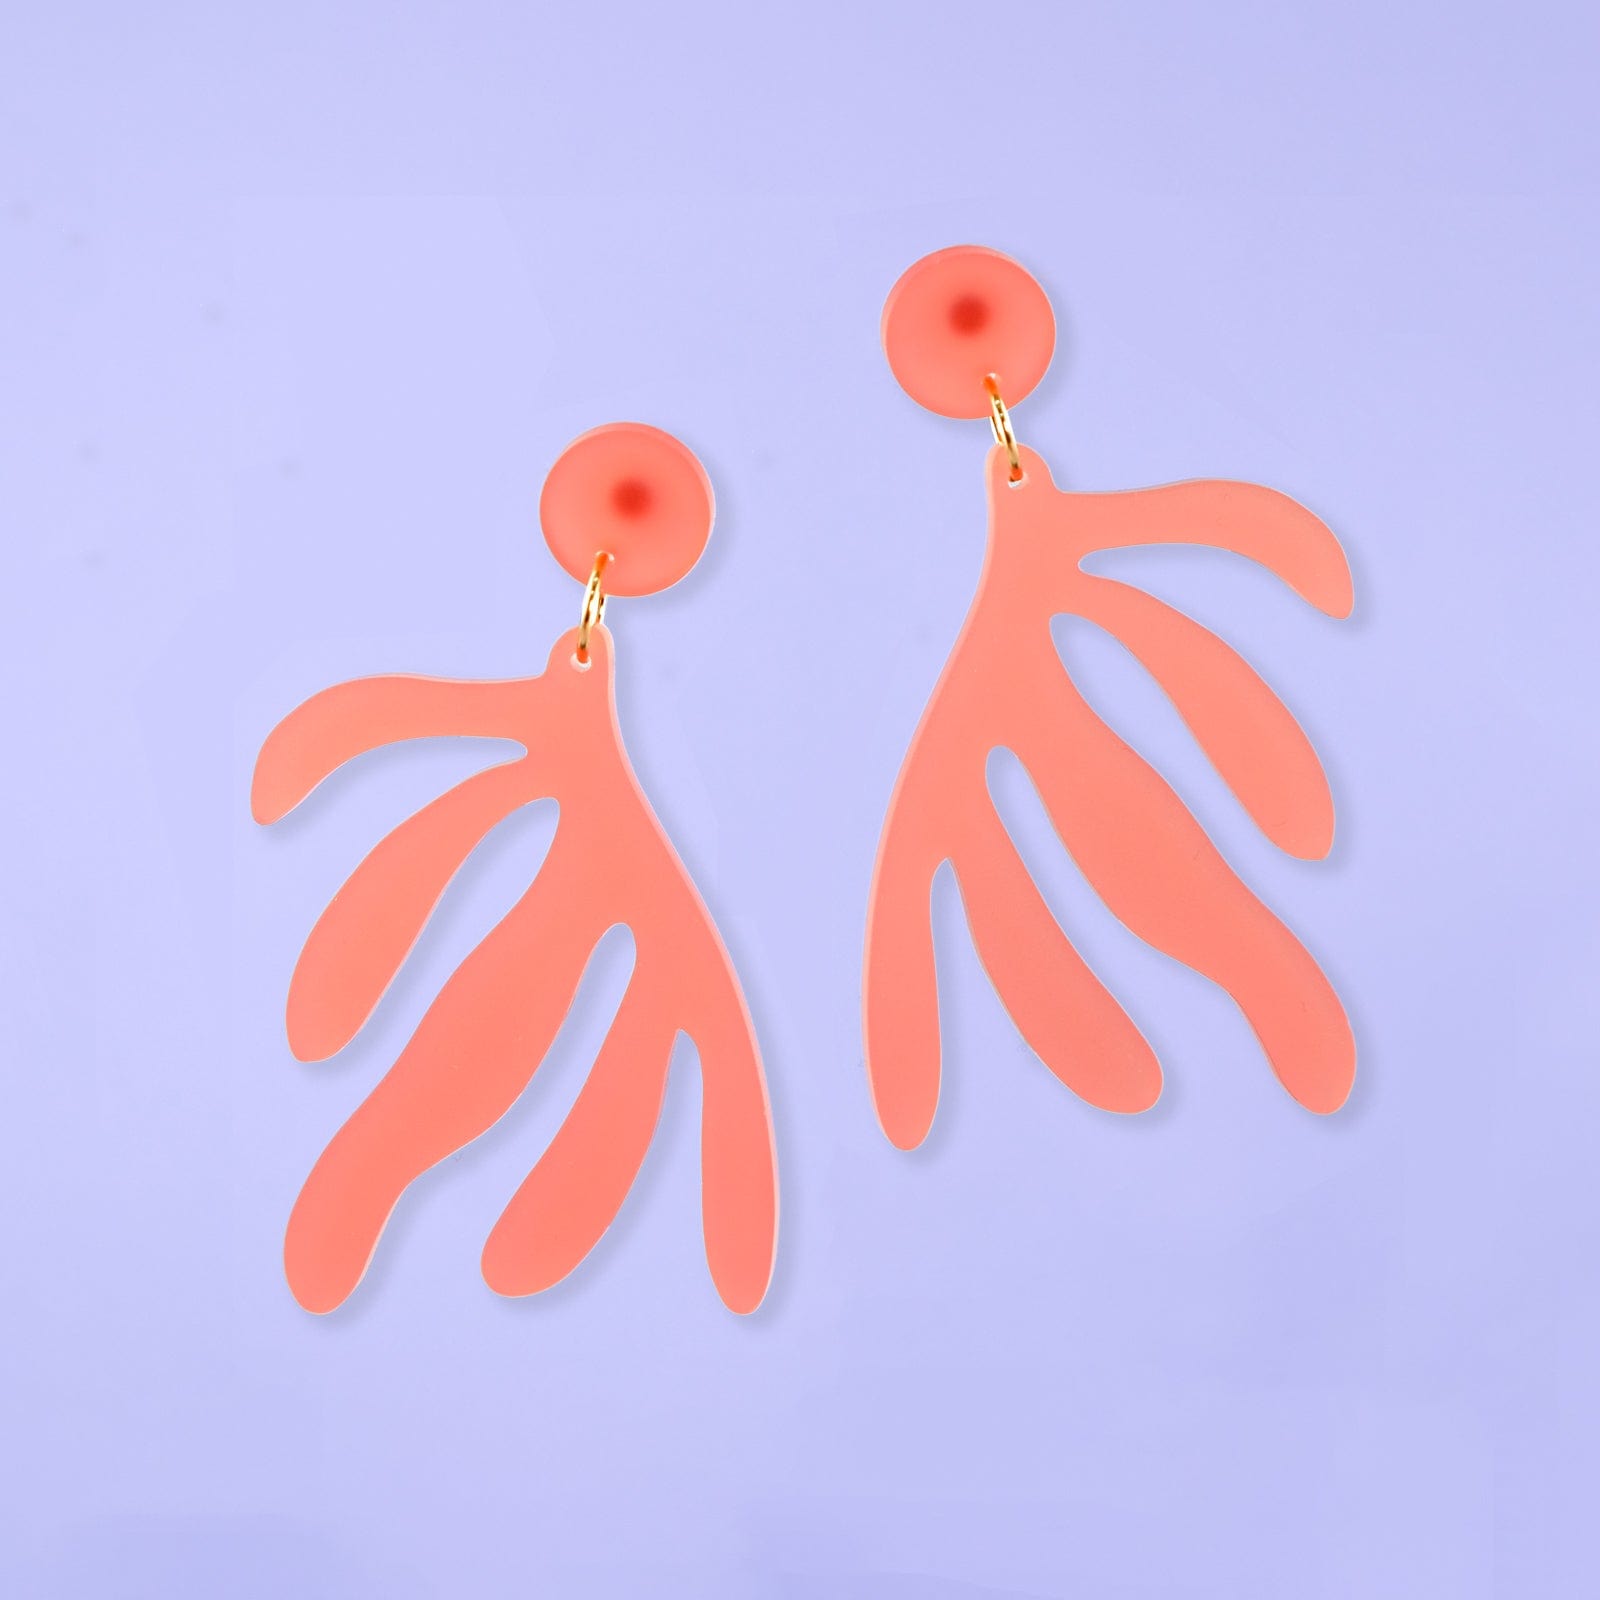 Art inspired statement earrings. Matisse dangly statement earrings in translucent coral acrylic #color_coral